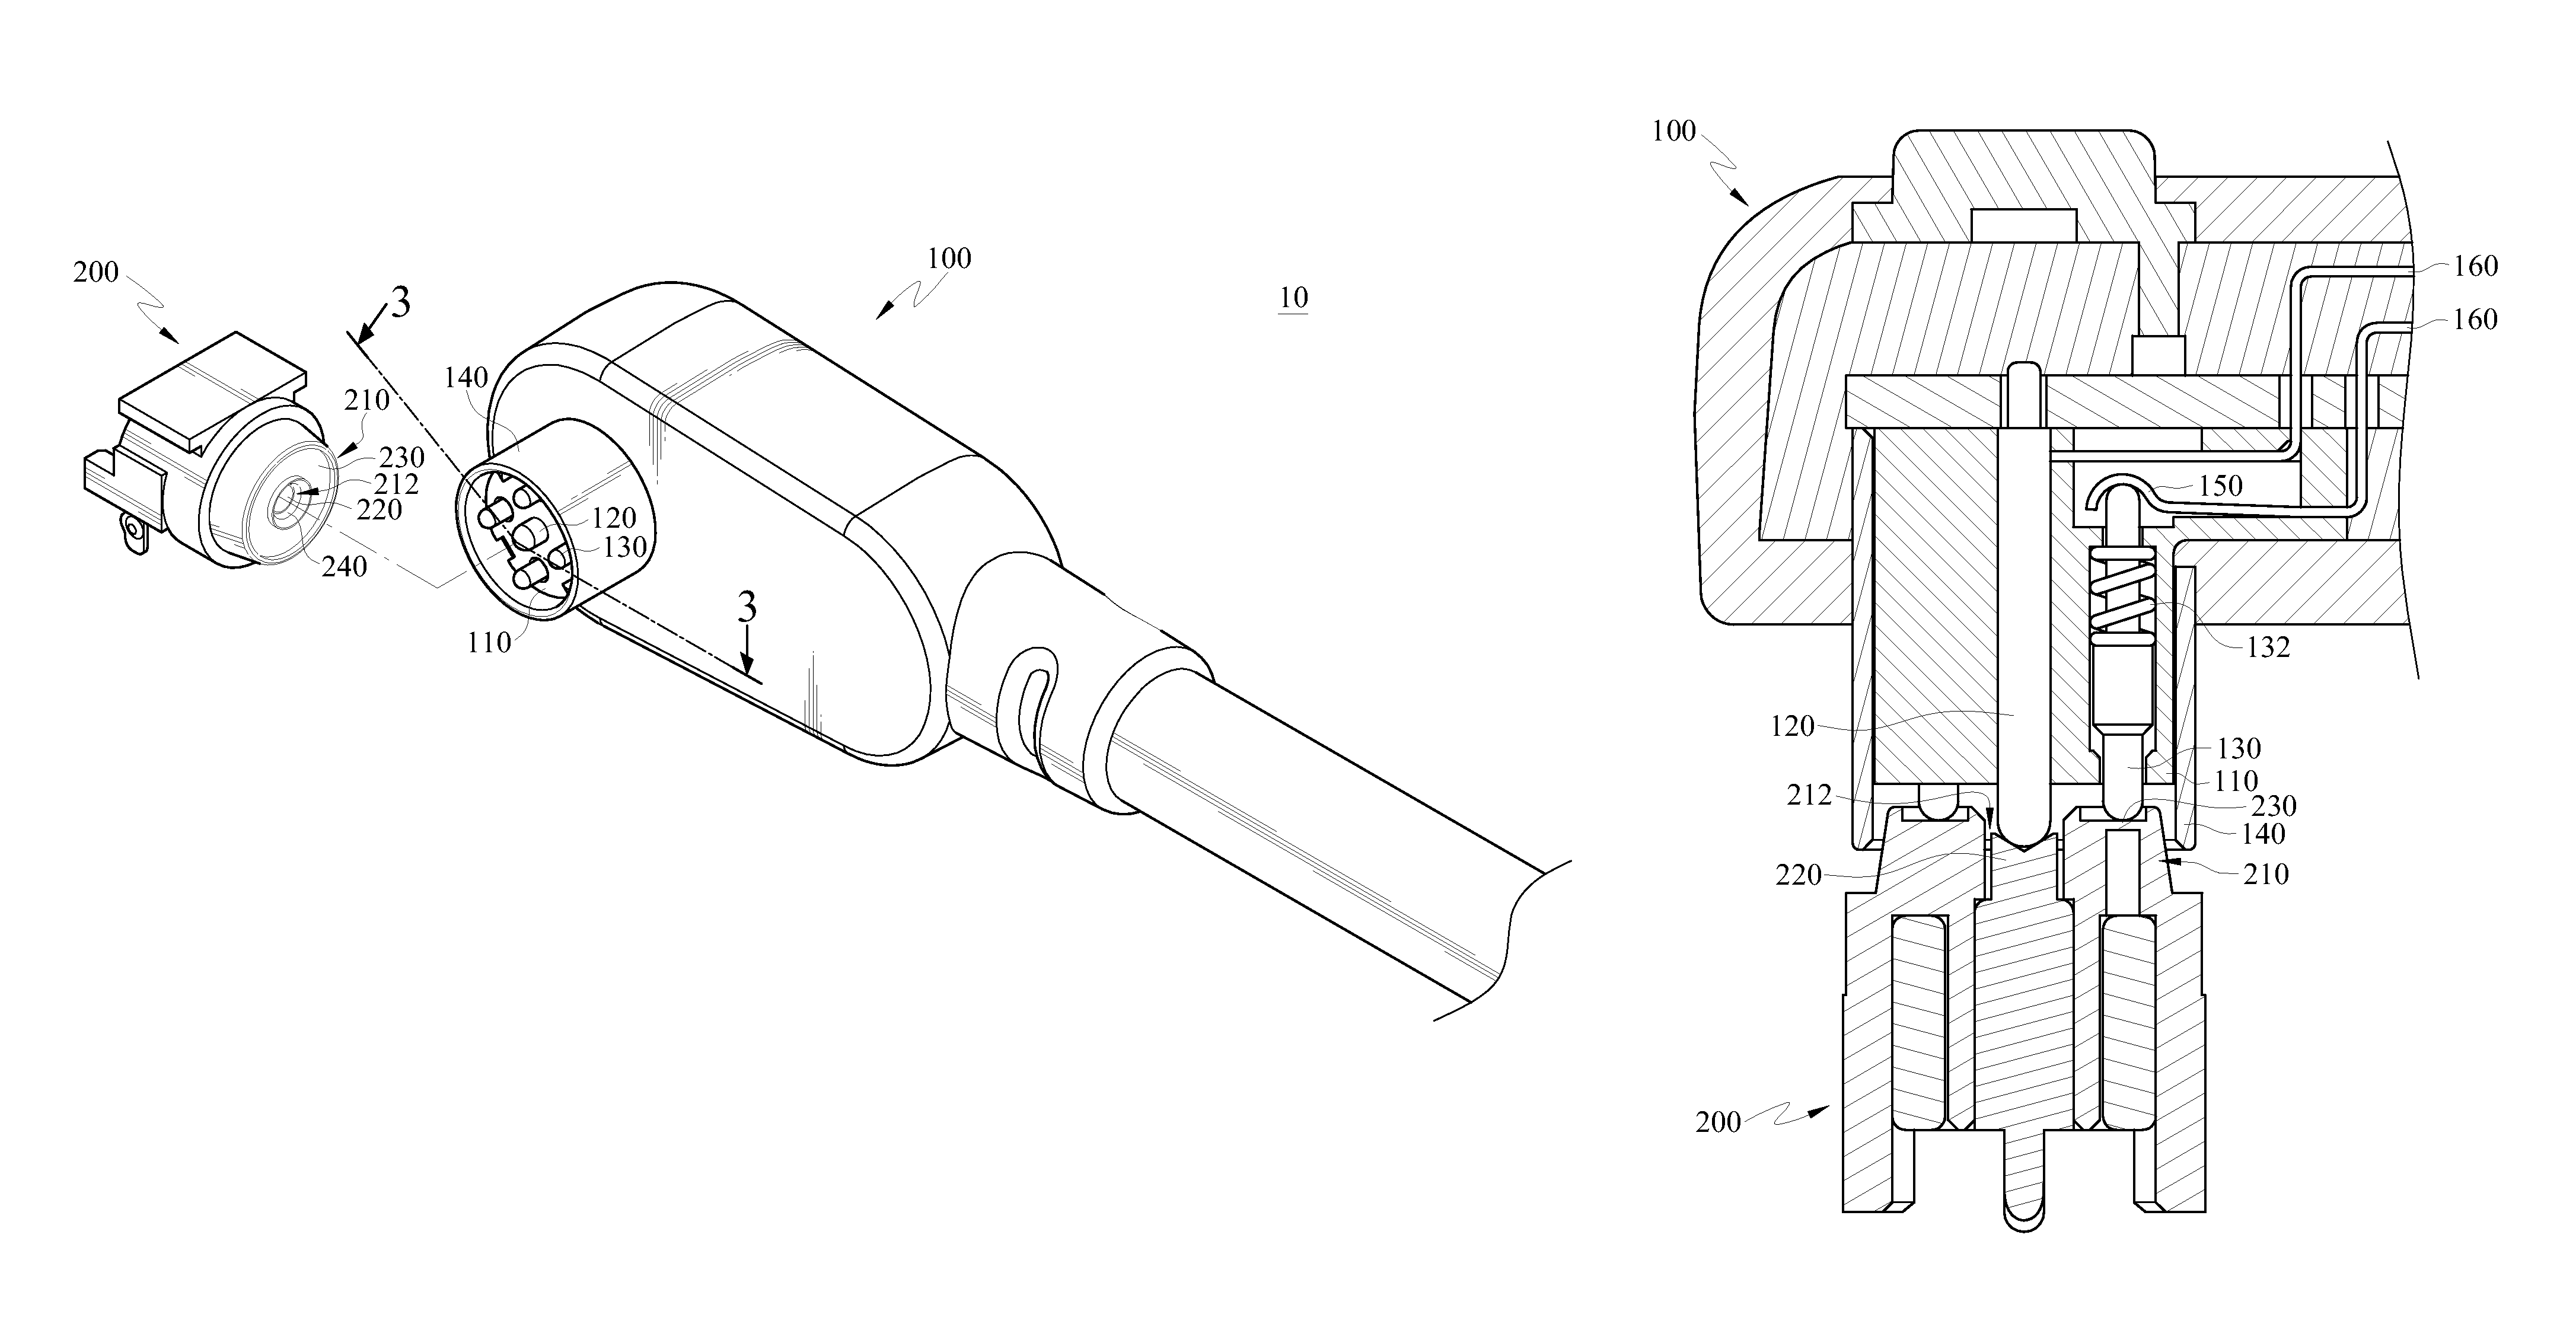 Connector module having a male connector and a female connector each having a magnetic part, a cathode contact and an anode contact